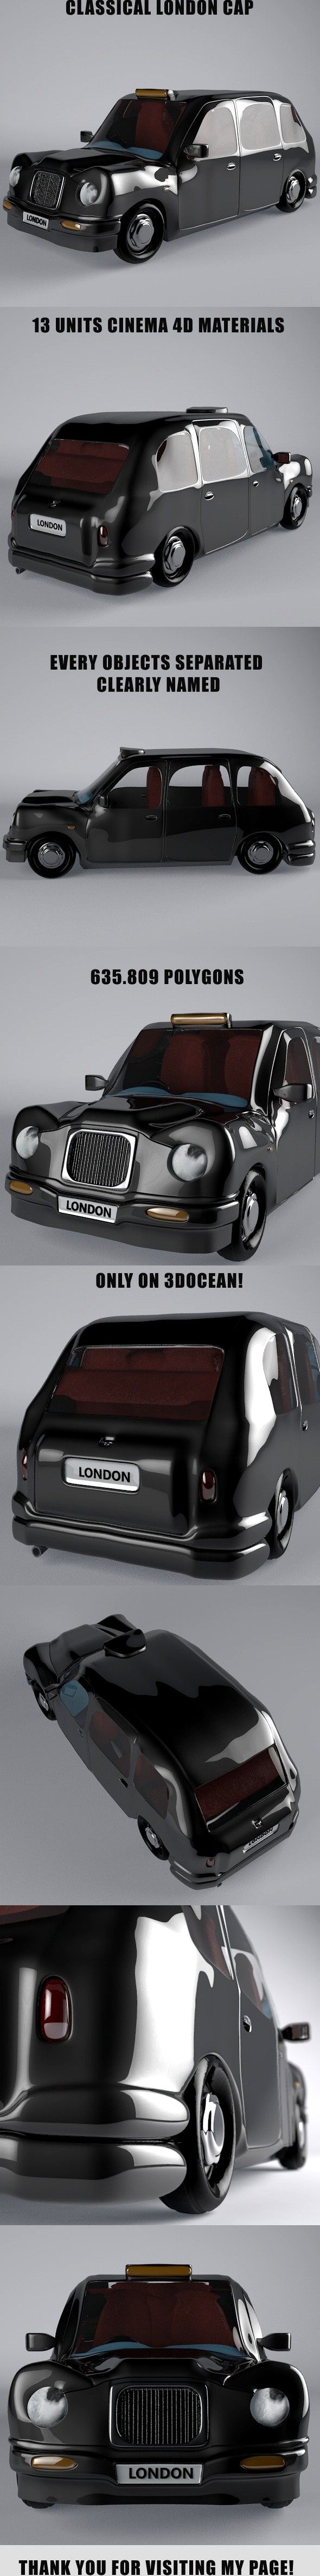 Classical London Taxi